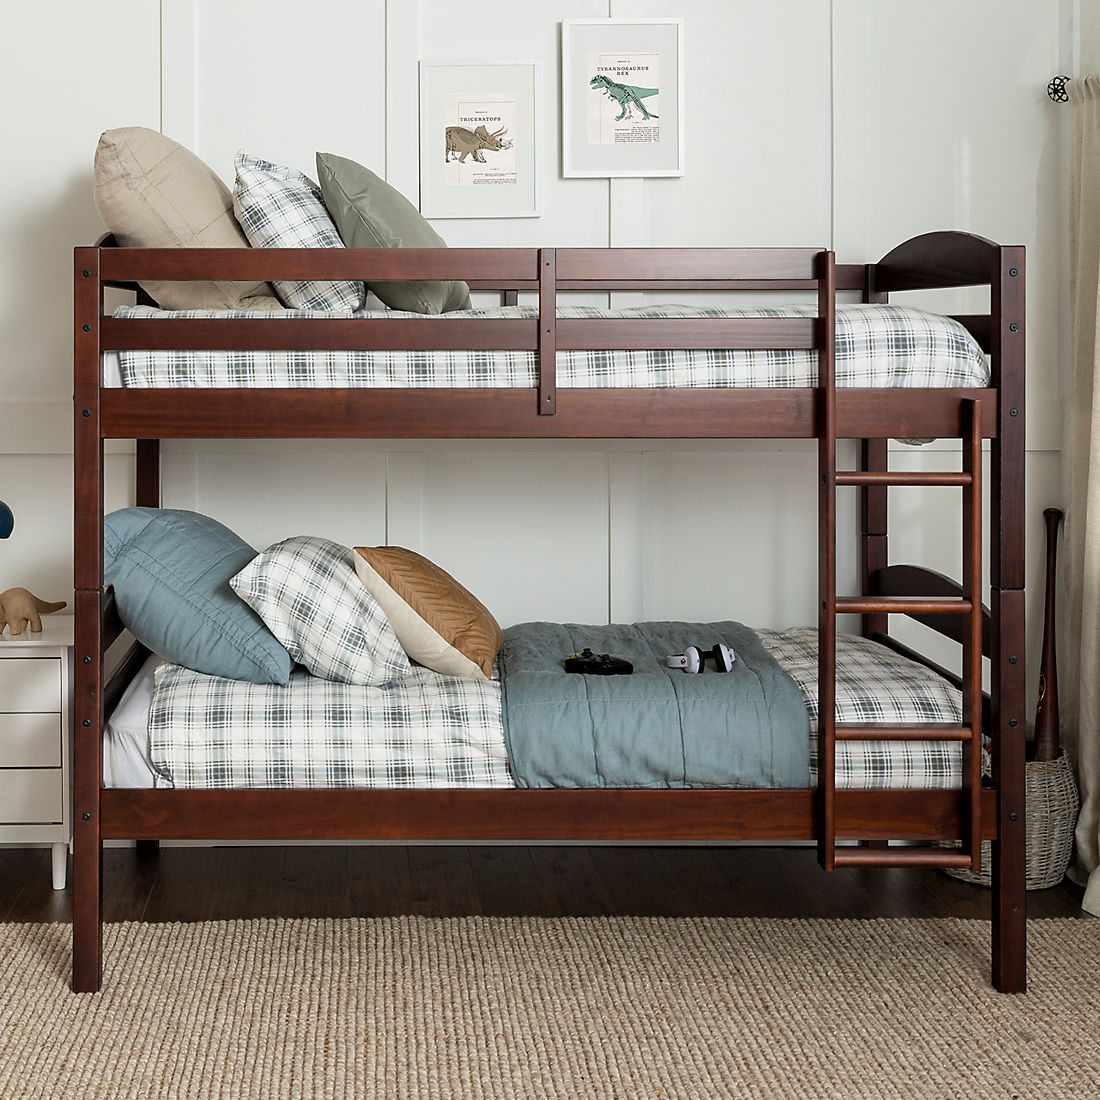 W Trends Twin Size Solid Wood Bunk Bed, Bunk Bed Reviews